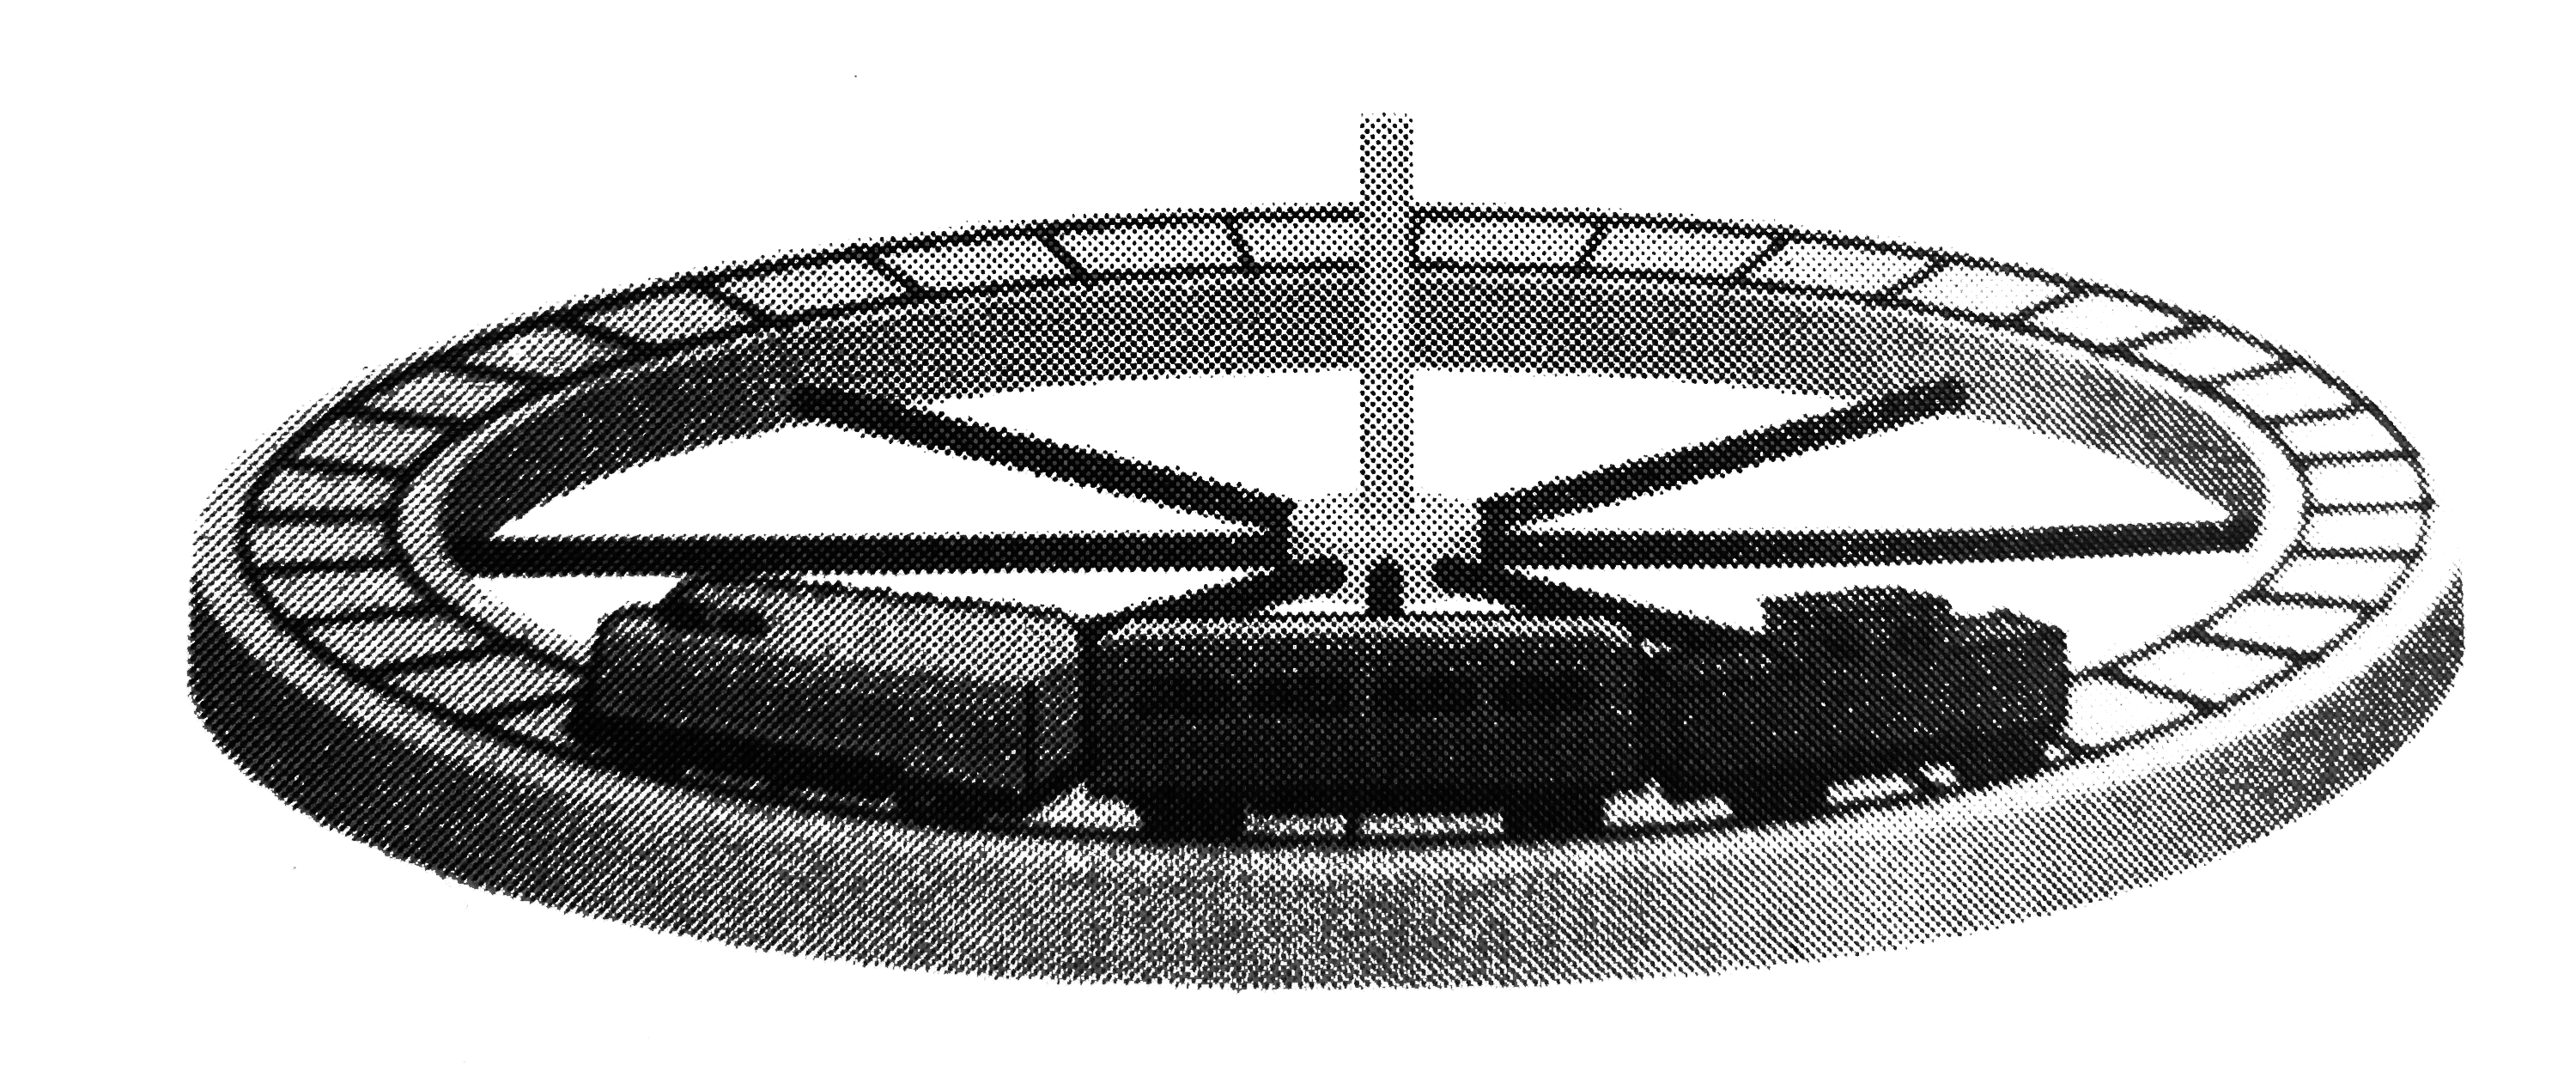 A track is mounted on a large wheel that is free to turn with neigligible friction about a vertical axis (Fig). A toy train of mass M is placed on the track and, with the system initially at rest, the train's electrical power is turned on. The train reaches speed v with respect to the track. What is the wheel's angular speed if its mass is m and its radius is r ? (Treat it as a hoop, and neglect the mass of the spokes and hub).   .